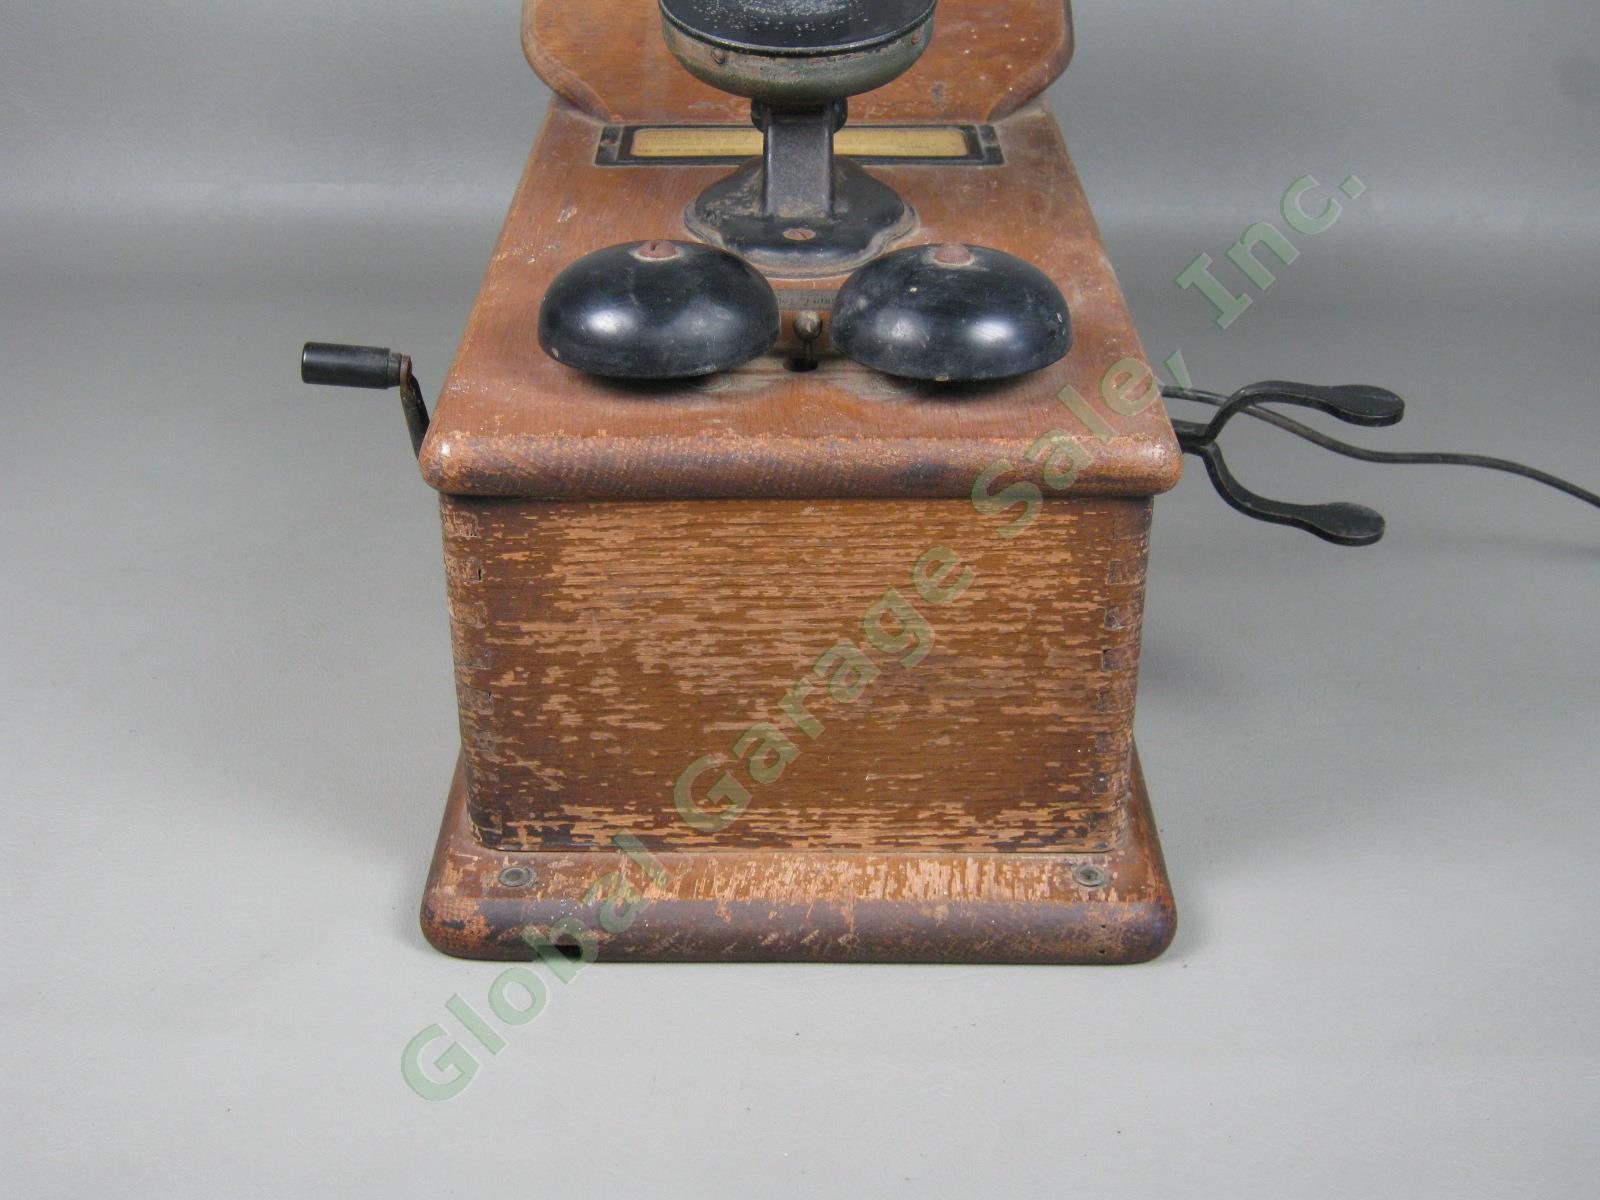 Lincoln Telegraph Wood Wooden Hand Crank Wall Phone W/ 4 Bar Magneto Rotary Dial 11